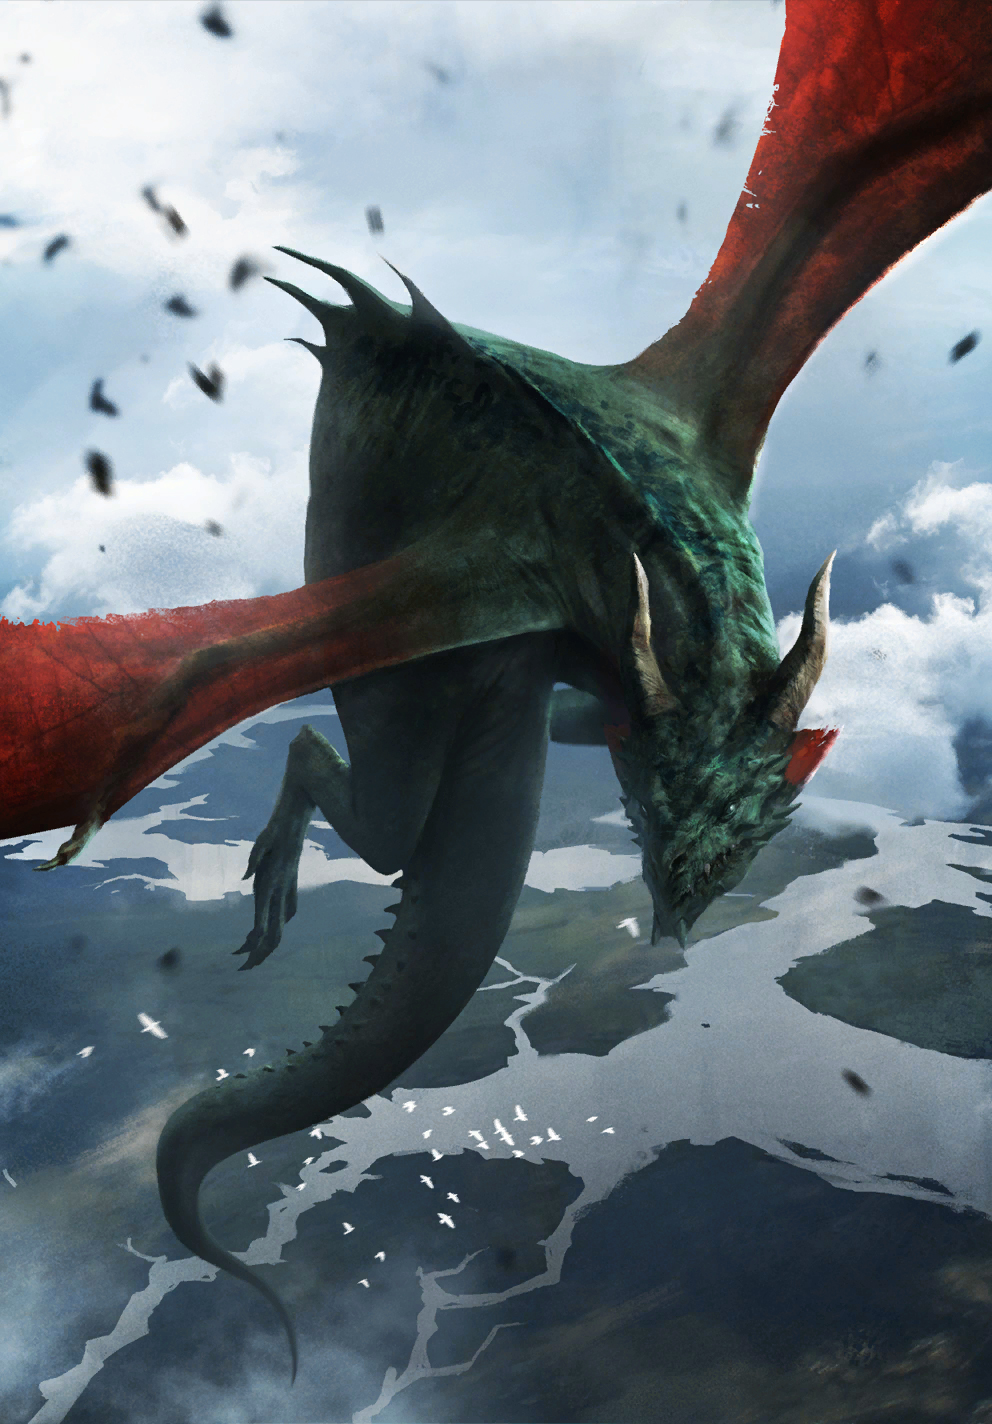 How Do Dragons Fit into the World of 'The Witcher'? - Netflix Tudum